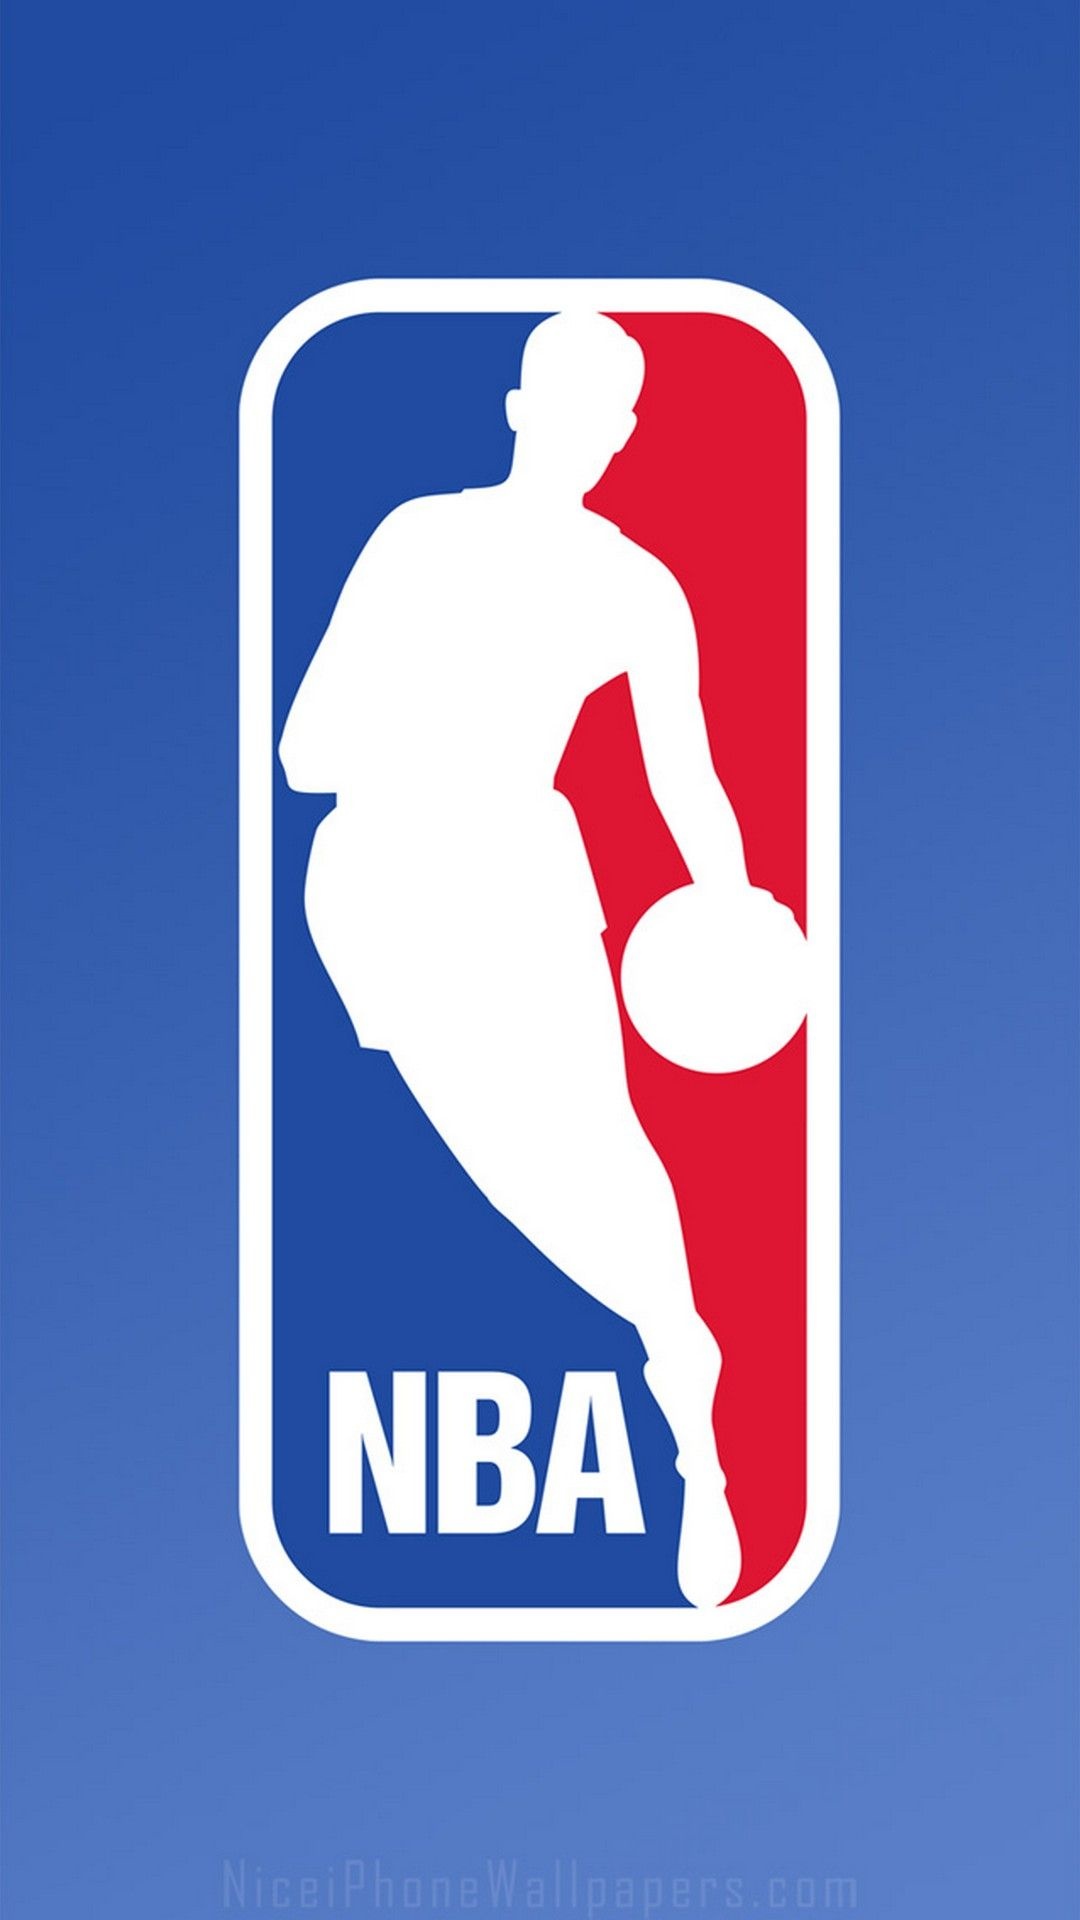 NBA logo phone wallpapers, Customizable backgrounds, Mobile style, Basketball pride, 1080x1920 Full HD Handy